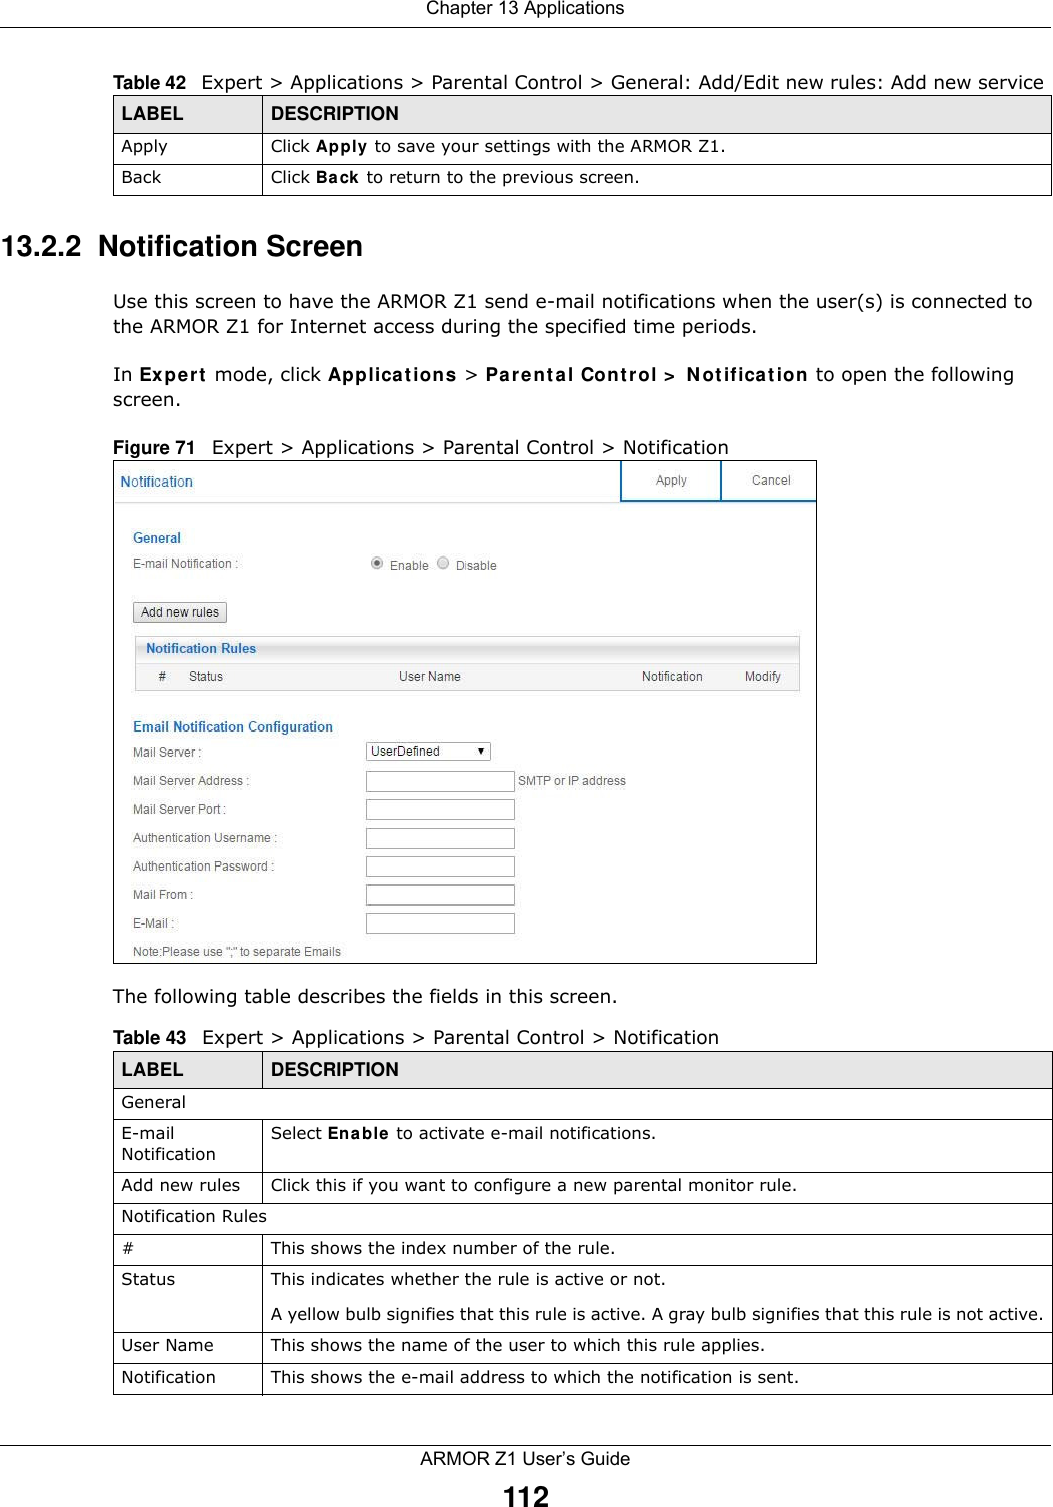 Chapter 13 ApplicationsARMOR Z1 User’s Guide11213.2.2  Notification ScreenUse this screen to have the ARMOR Z1 send e-mail notifications when the user(s) is connected to the ARMOR Z1 for Internet access during the specified time periods.In Expert mode, click Applications &gt; Parental Control &gt; Notification to open the following screen. Figure 71   Expert &gt; Applications &gt; Parental Control &gt; Notification The following table describes the fields in this screen. Apply Click Apply to save your settings with the ARMOR Z1.Back Click Back to return to the previous screen.Table 42   Expert &gt; Applications &gt; Parental Control &gt; General: Add/Edit new rules: Add new service LABEL DESCRIPTIONTable 43   Expert &gt; Applications &gt; Parental Control &gt; Notification LABEL DESCRIPTIONGeneralE-mail NotificationSelect Enable to activate e-mail notifications.Add new rules Click this if you want to configure a new parental monitor rule.Notification Rules#This shows the index number of the rule.Status This indicates whether the rule is active or not.A yellow bulb signifies that this rule is active. A gray bulb signifies that this rule is not active.User Name This shows the name of the user to which this rule applies.Notification This shows the e-mail address to which the notification is sent.